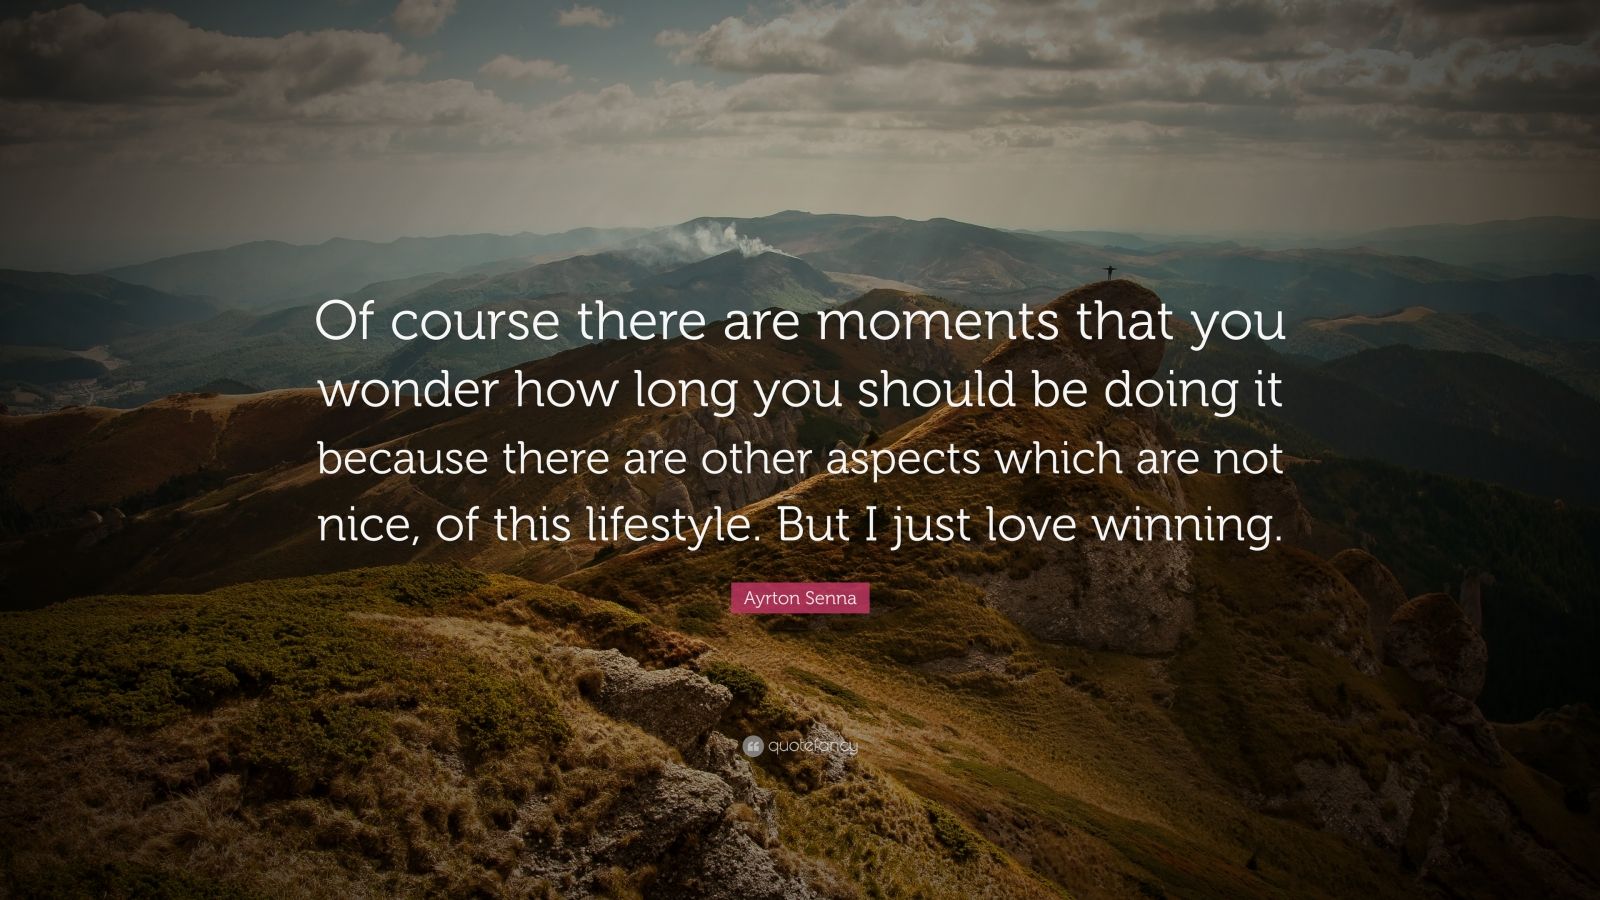 Ayrton Senna Quote: "Of course there are moments that you ...